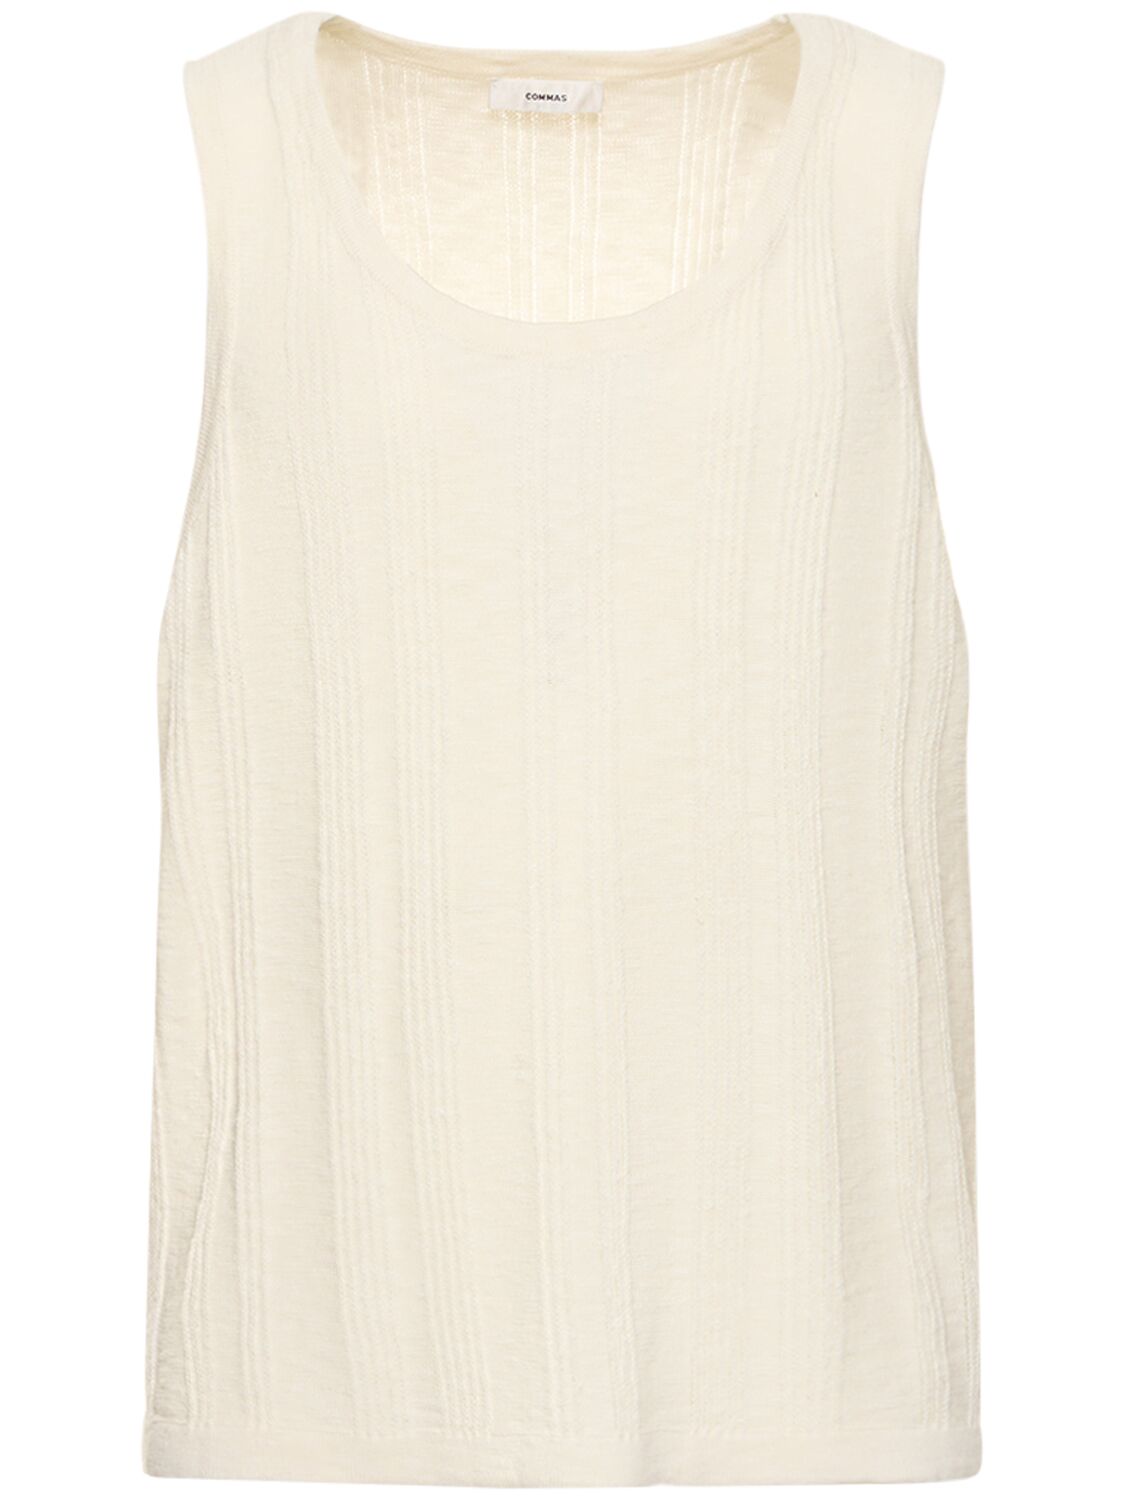 Commas Textured Knit Tank Top In Off-white